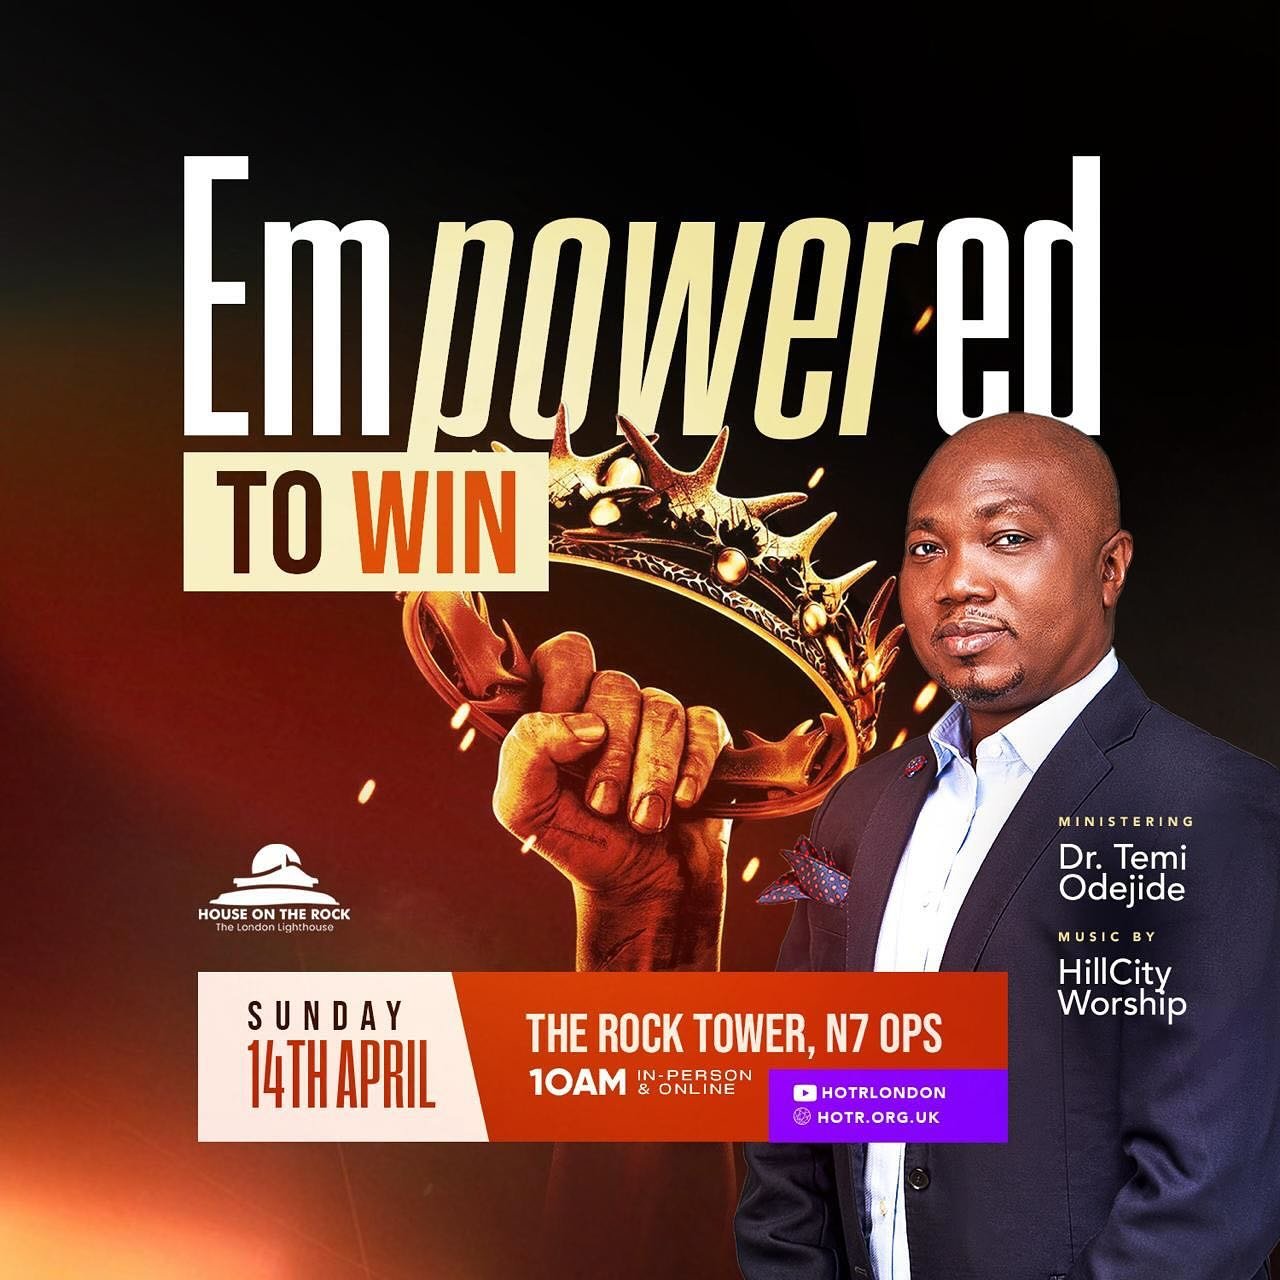 &ldquo;As we emerge from a month of transformation, immerse yourself in Sunday&rsquo;s service titled 
&lsquo;EMPOWERED,&rsquo; led by the dynamic Pastor Temi Odejide. 

Join us for an uplifting experience that will ignite your spirit and propel you 